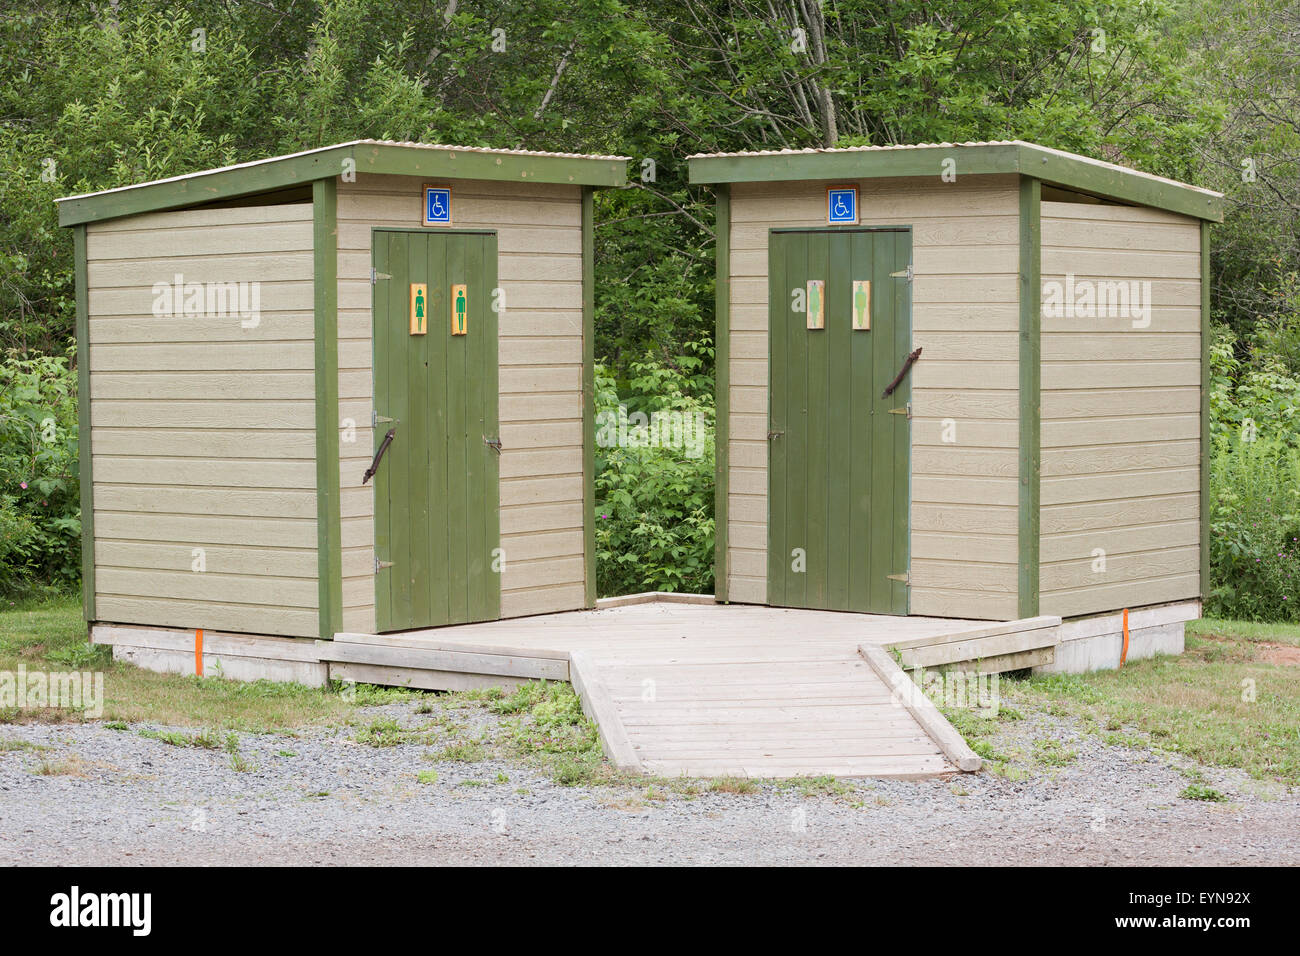 Male and Female outdoor restroom facilities with handicapped accessibility. Stock Photo